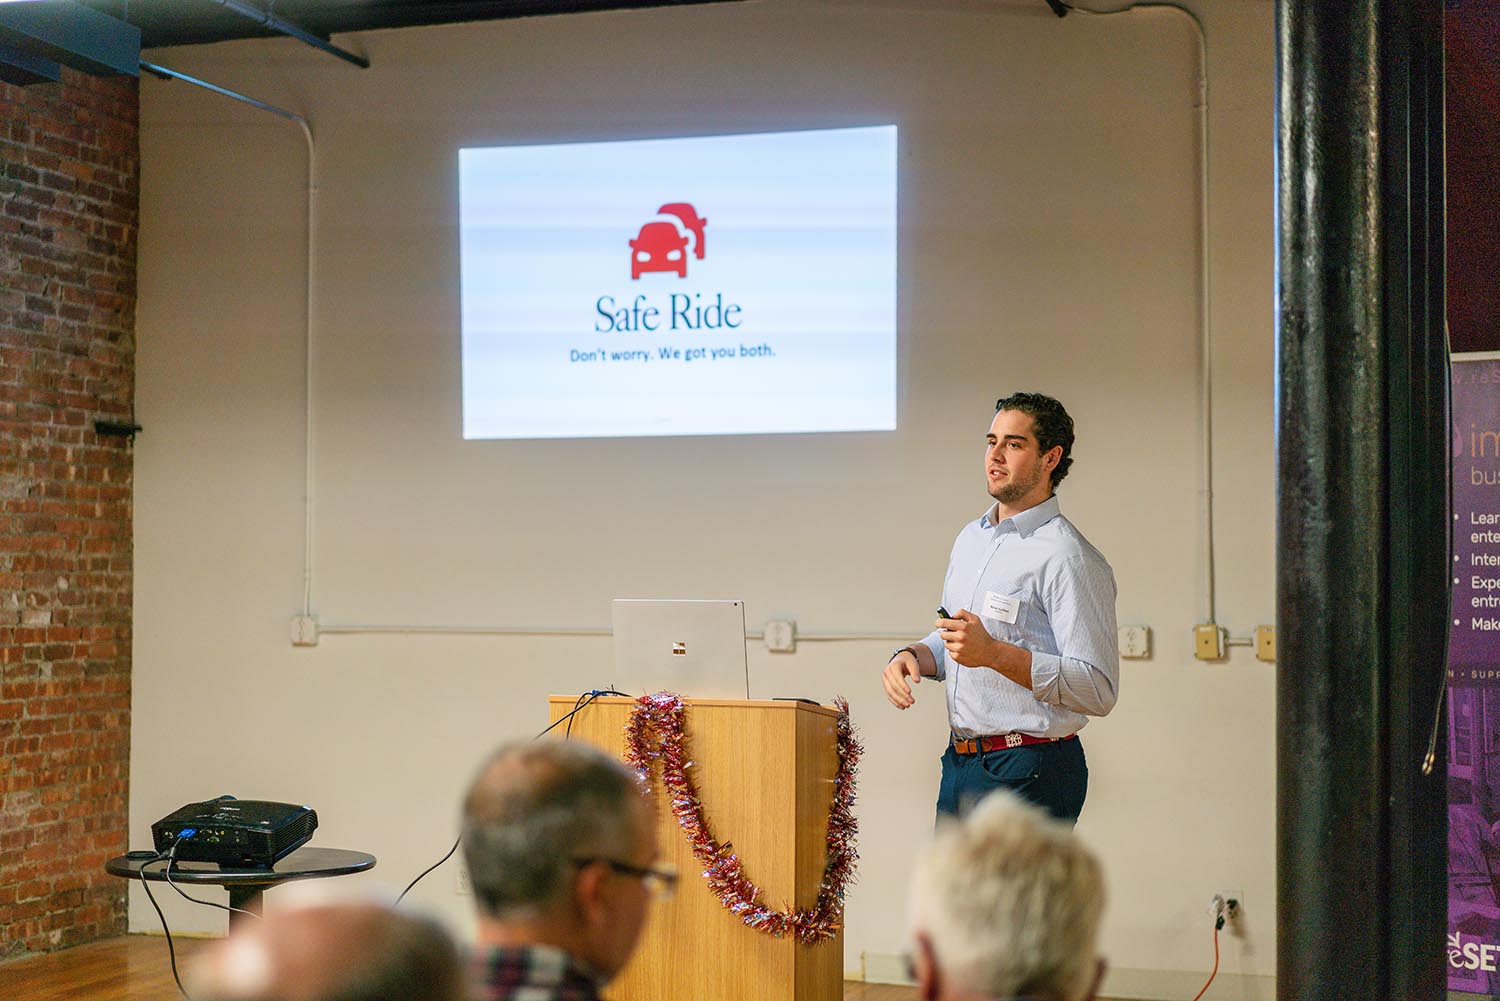 Nolan stands in front of the screen with his logo for Safe Ride